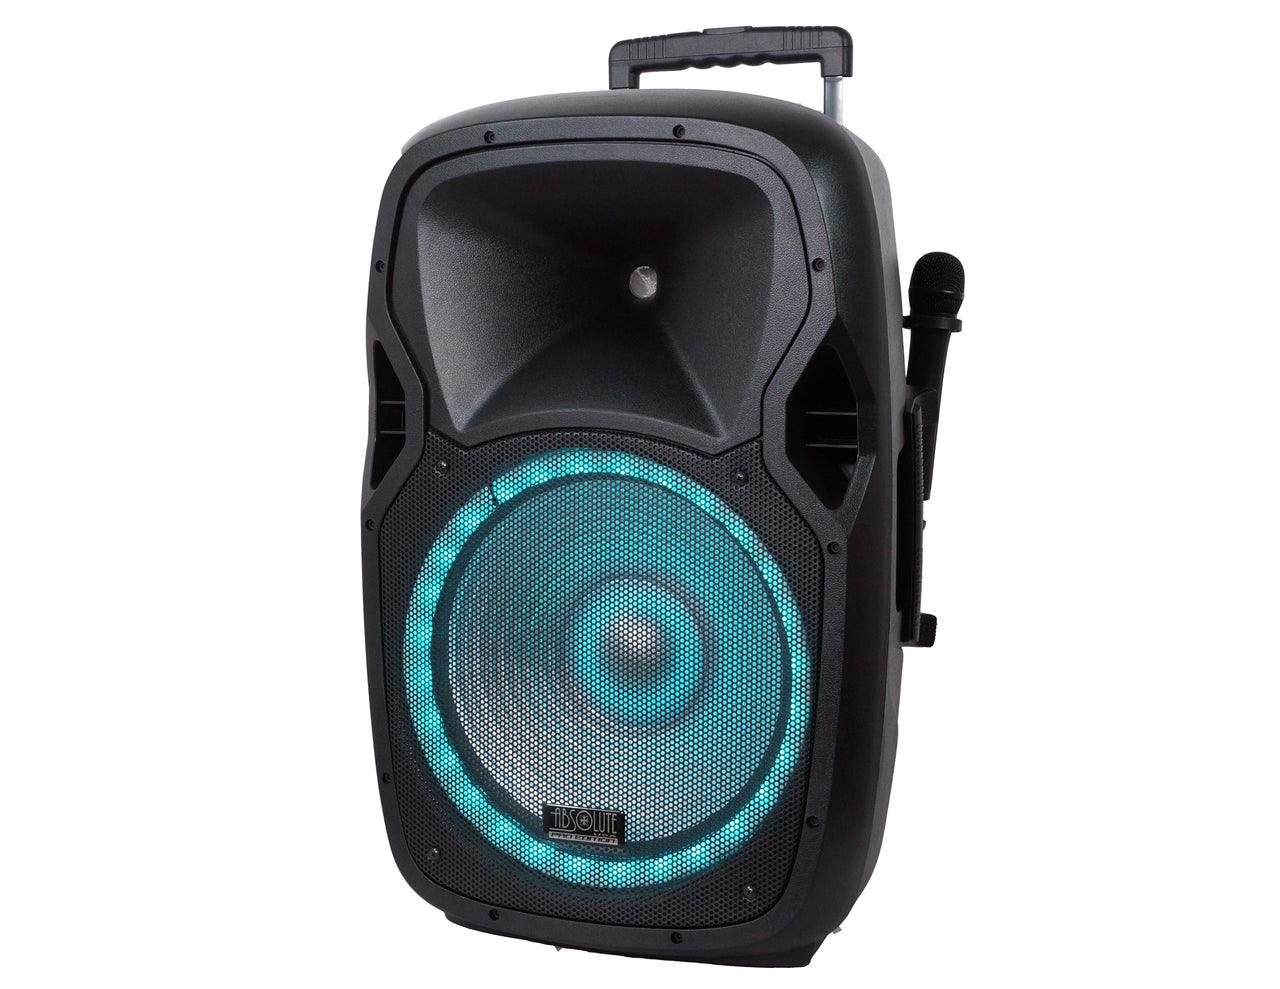 Absolute USA USPROBAT15 15" Wireless Portable PA Speaker System 3500W High Powered Bluetooth Indoor and Outdoor DJ PA Sound Stereo Loudspeaker USB SD MP3 AUX Input Flashing Party Light & FM Radio